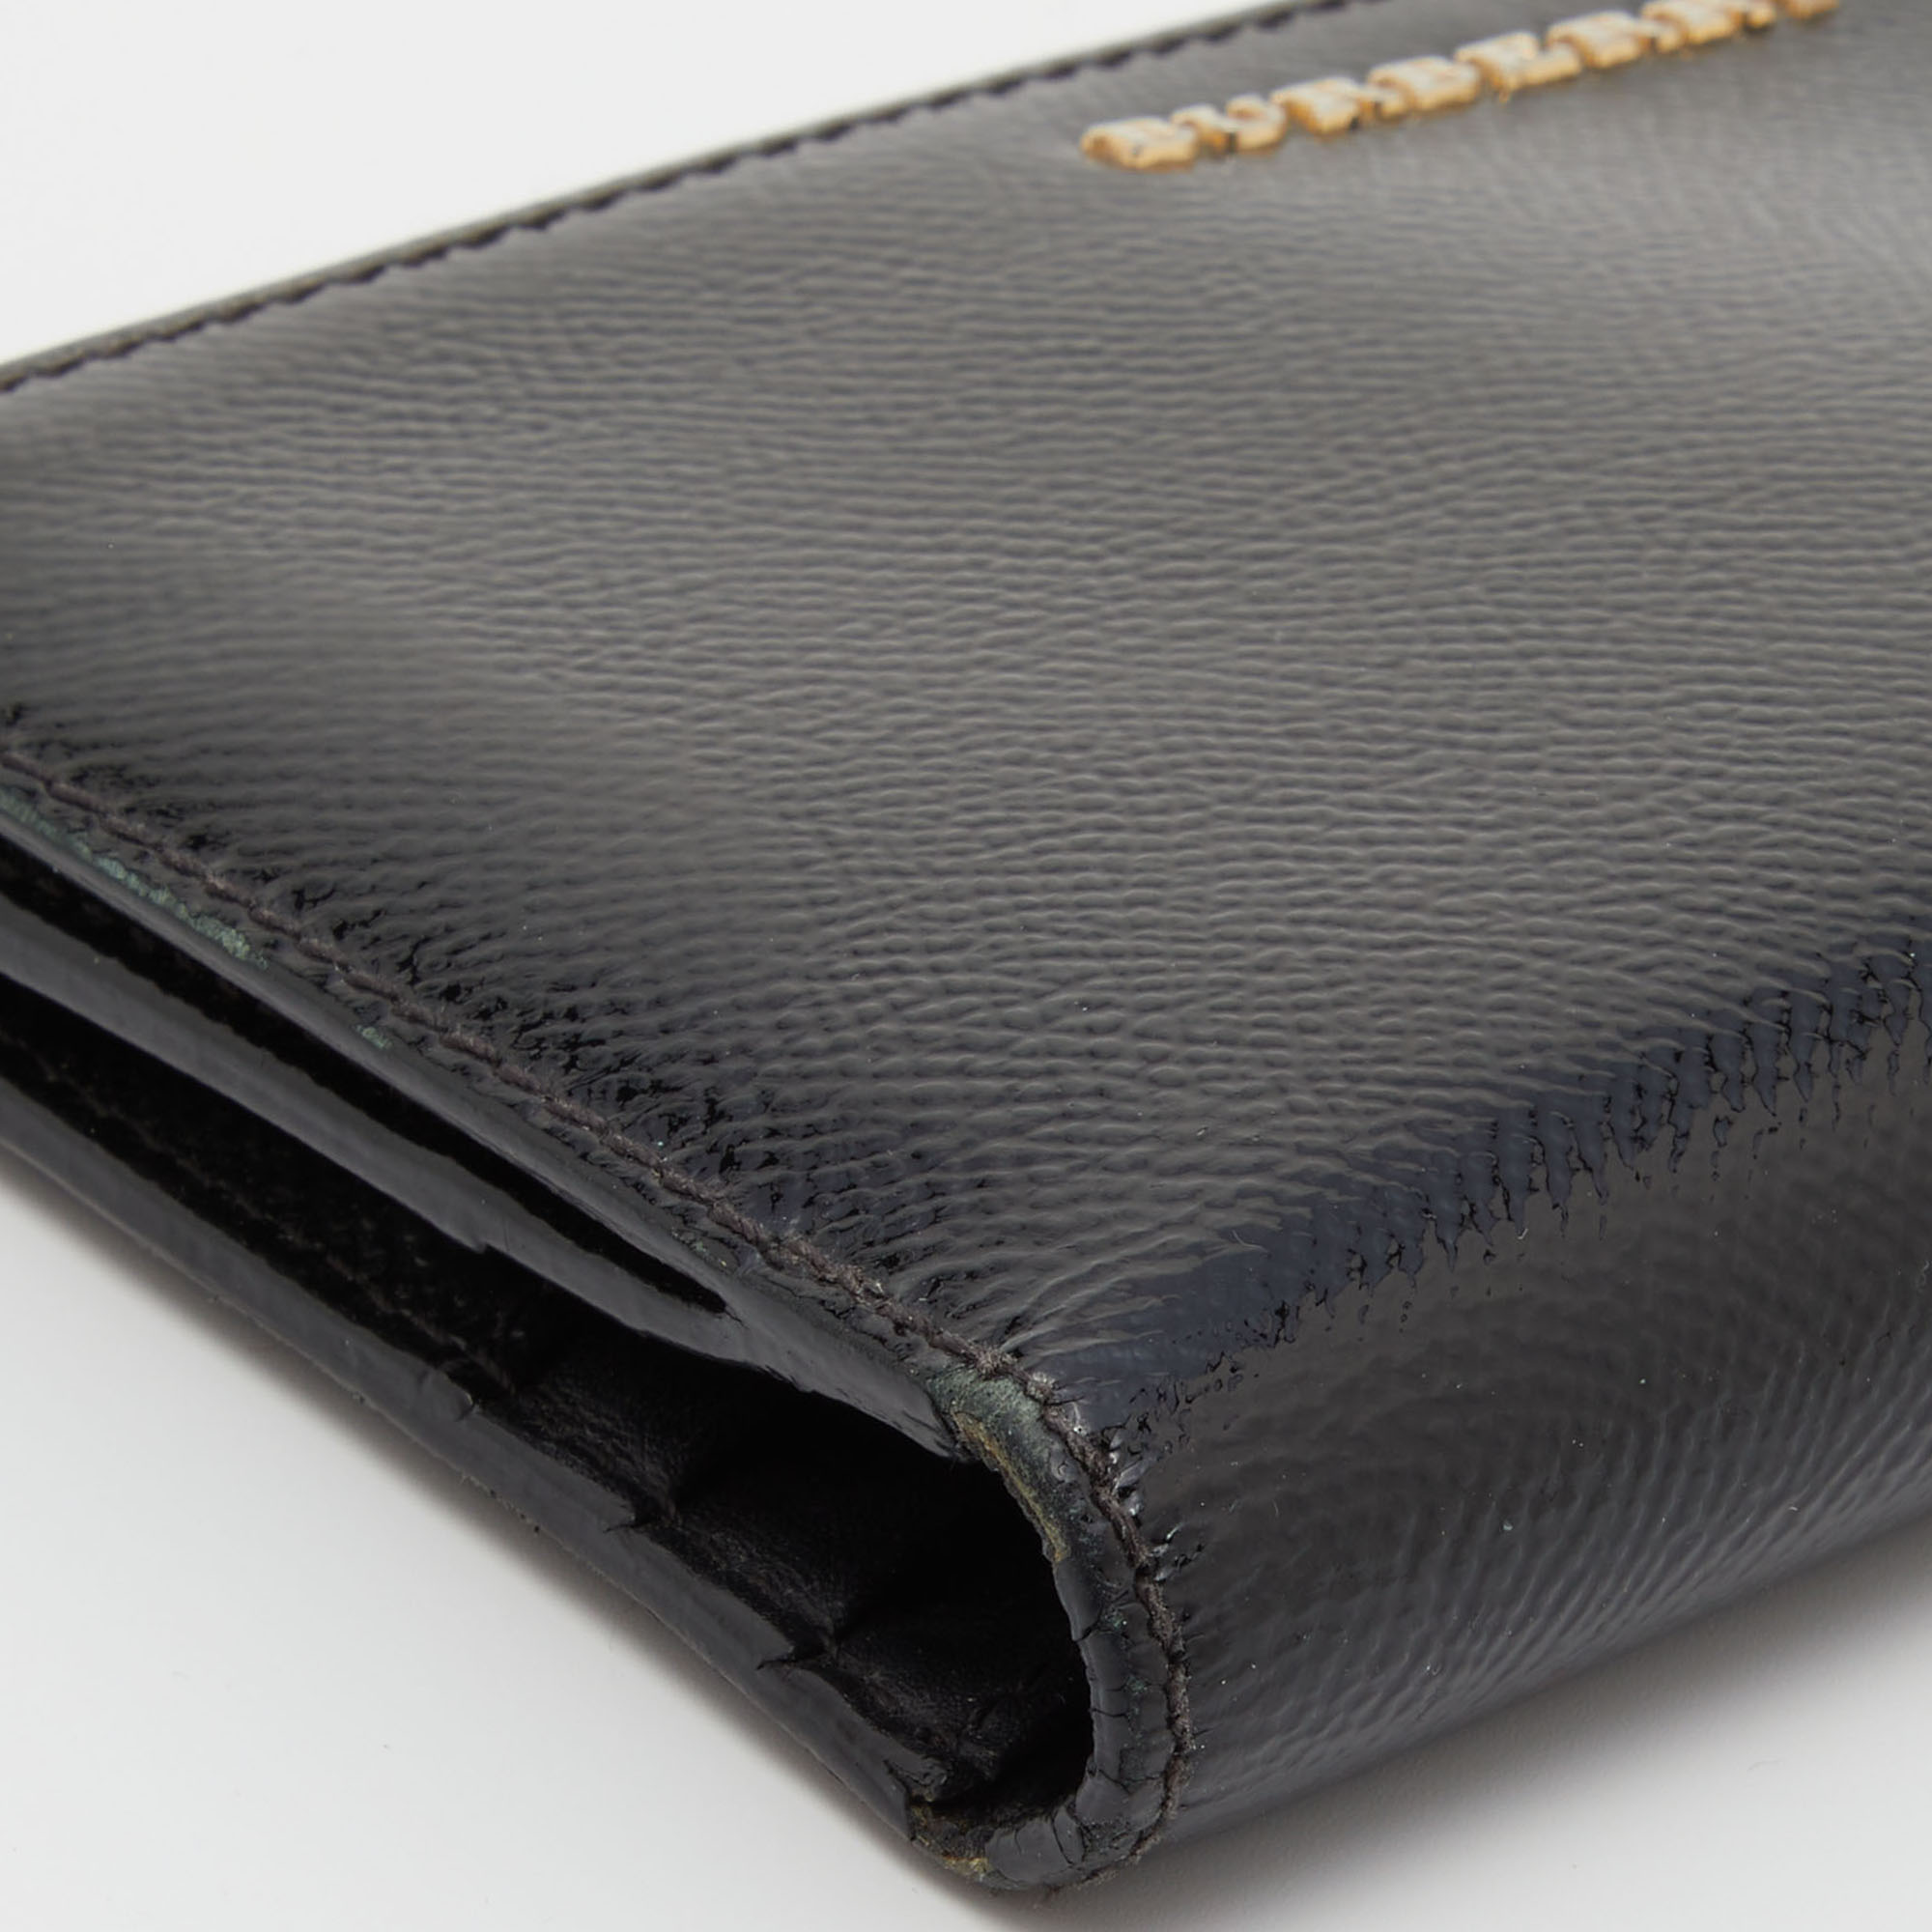 Burberry Black Patent Leather Long Zip Wallet